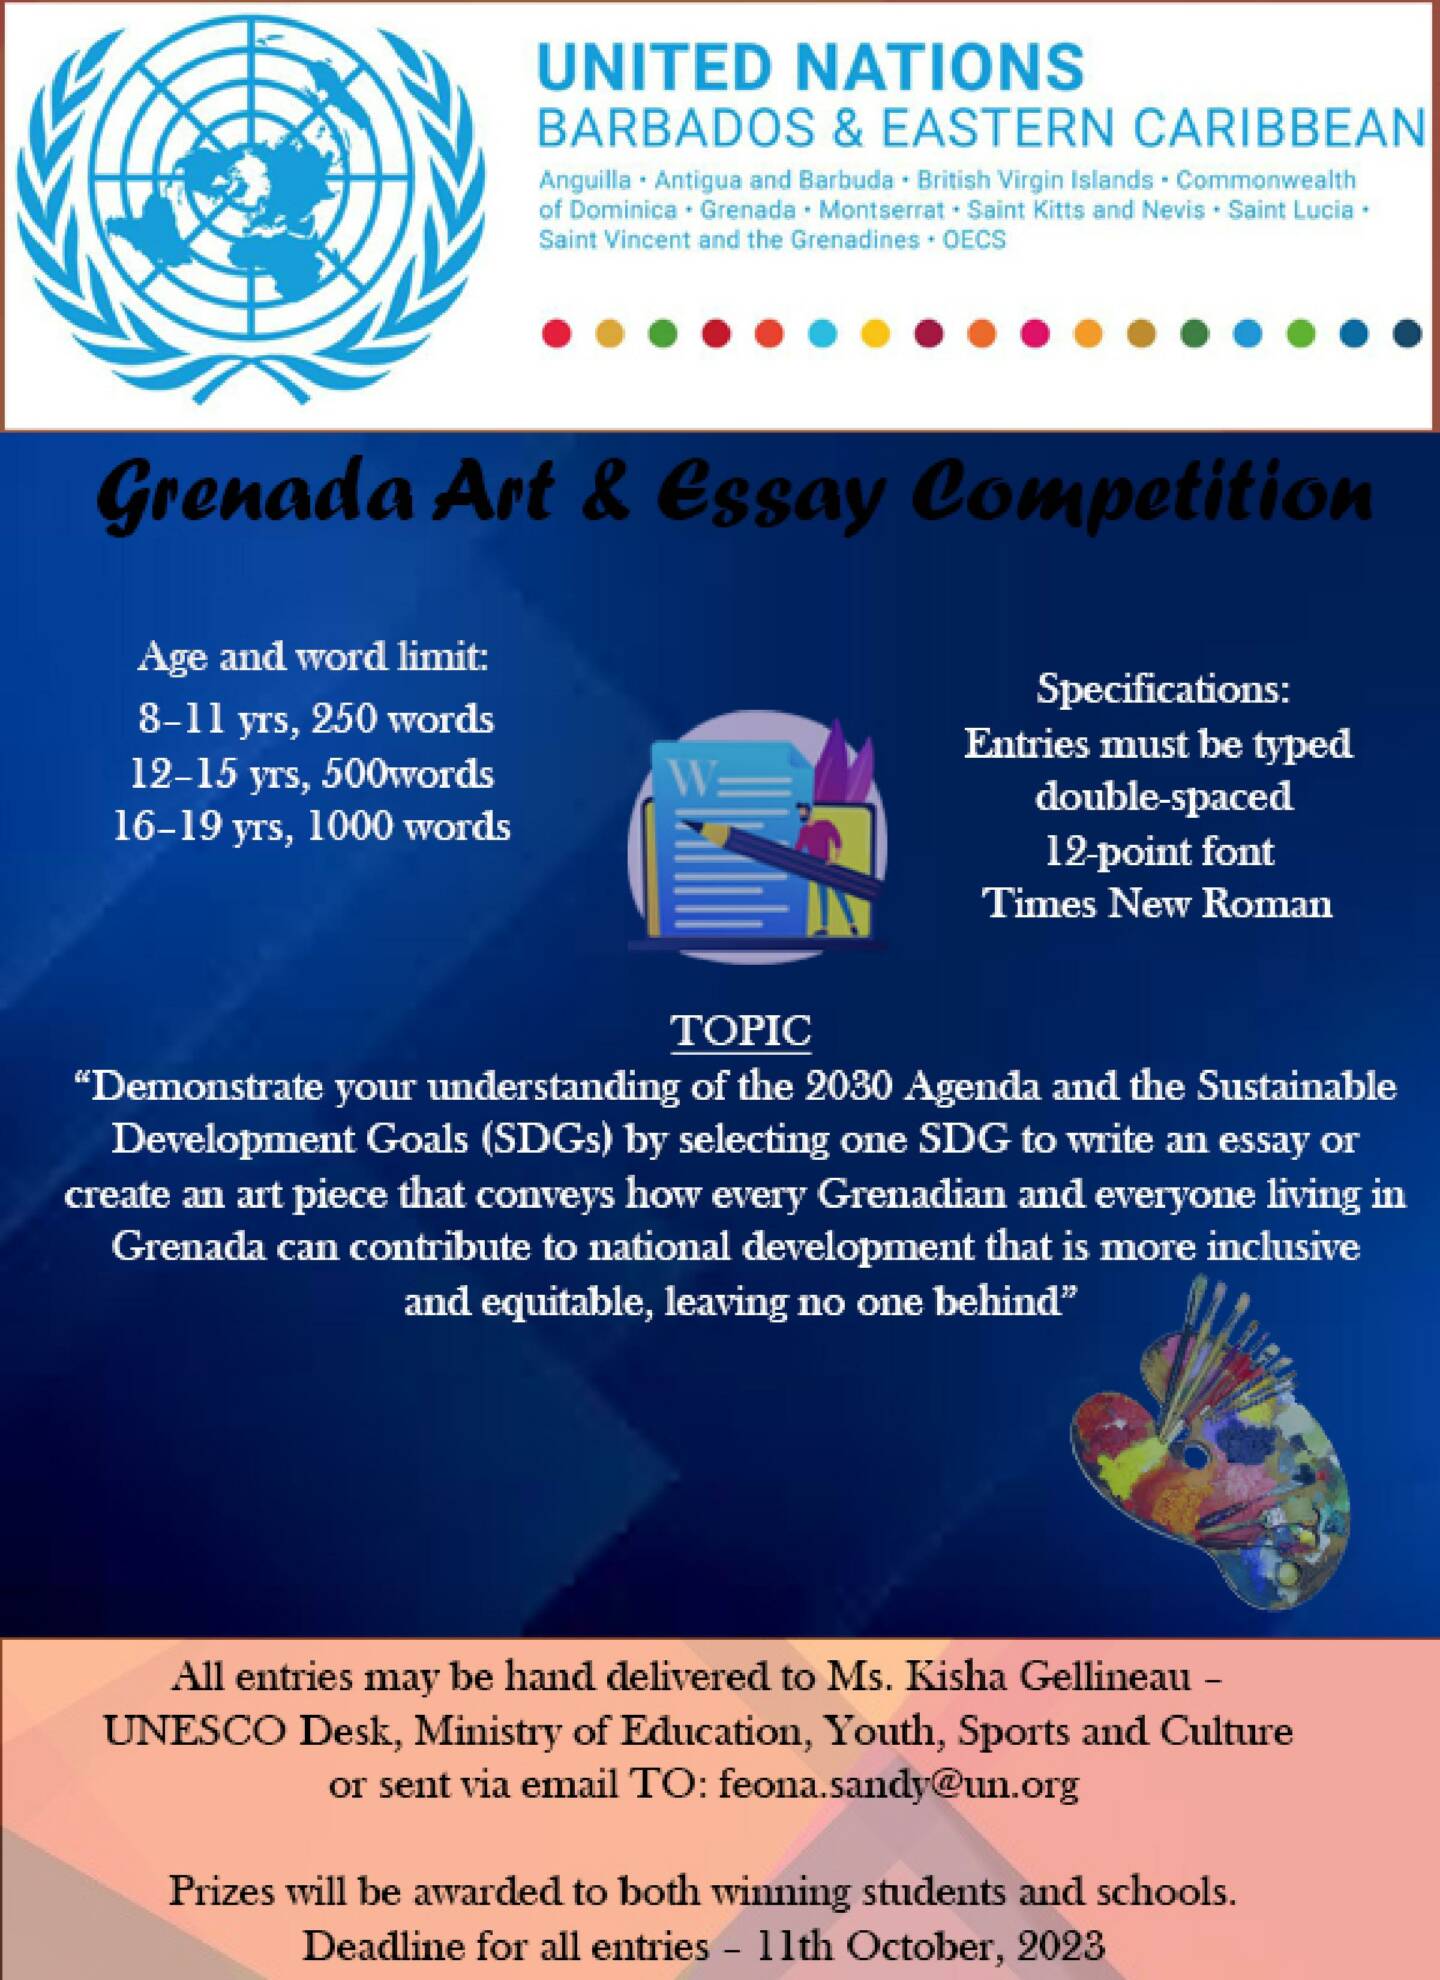 essay on art competition